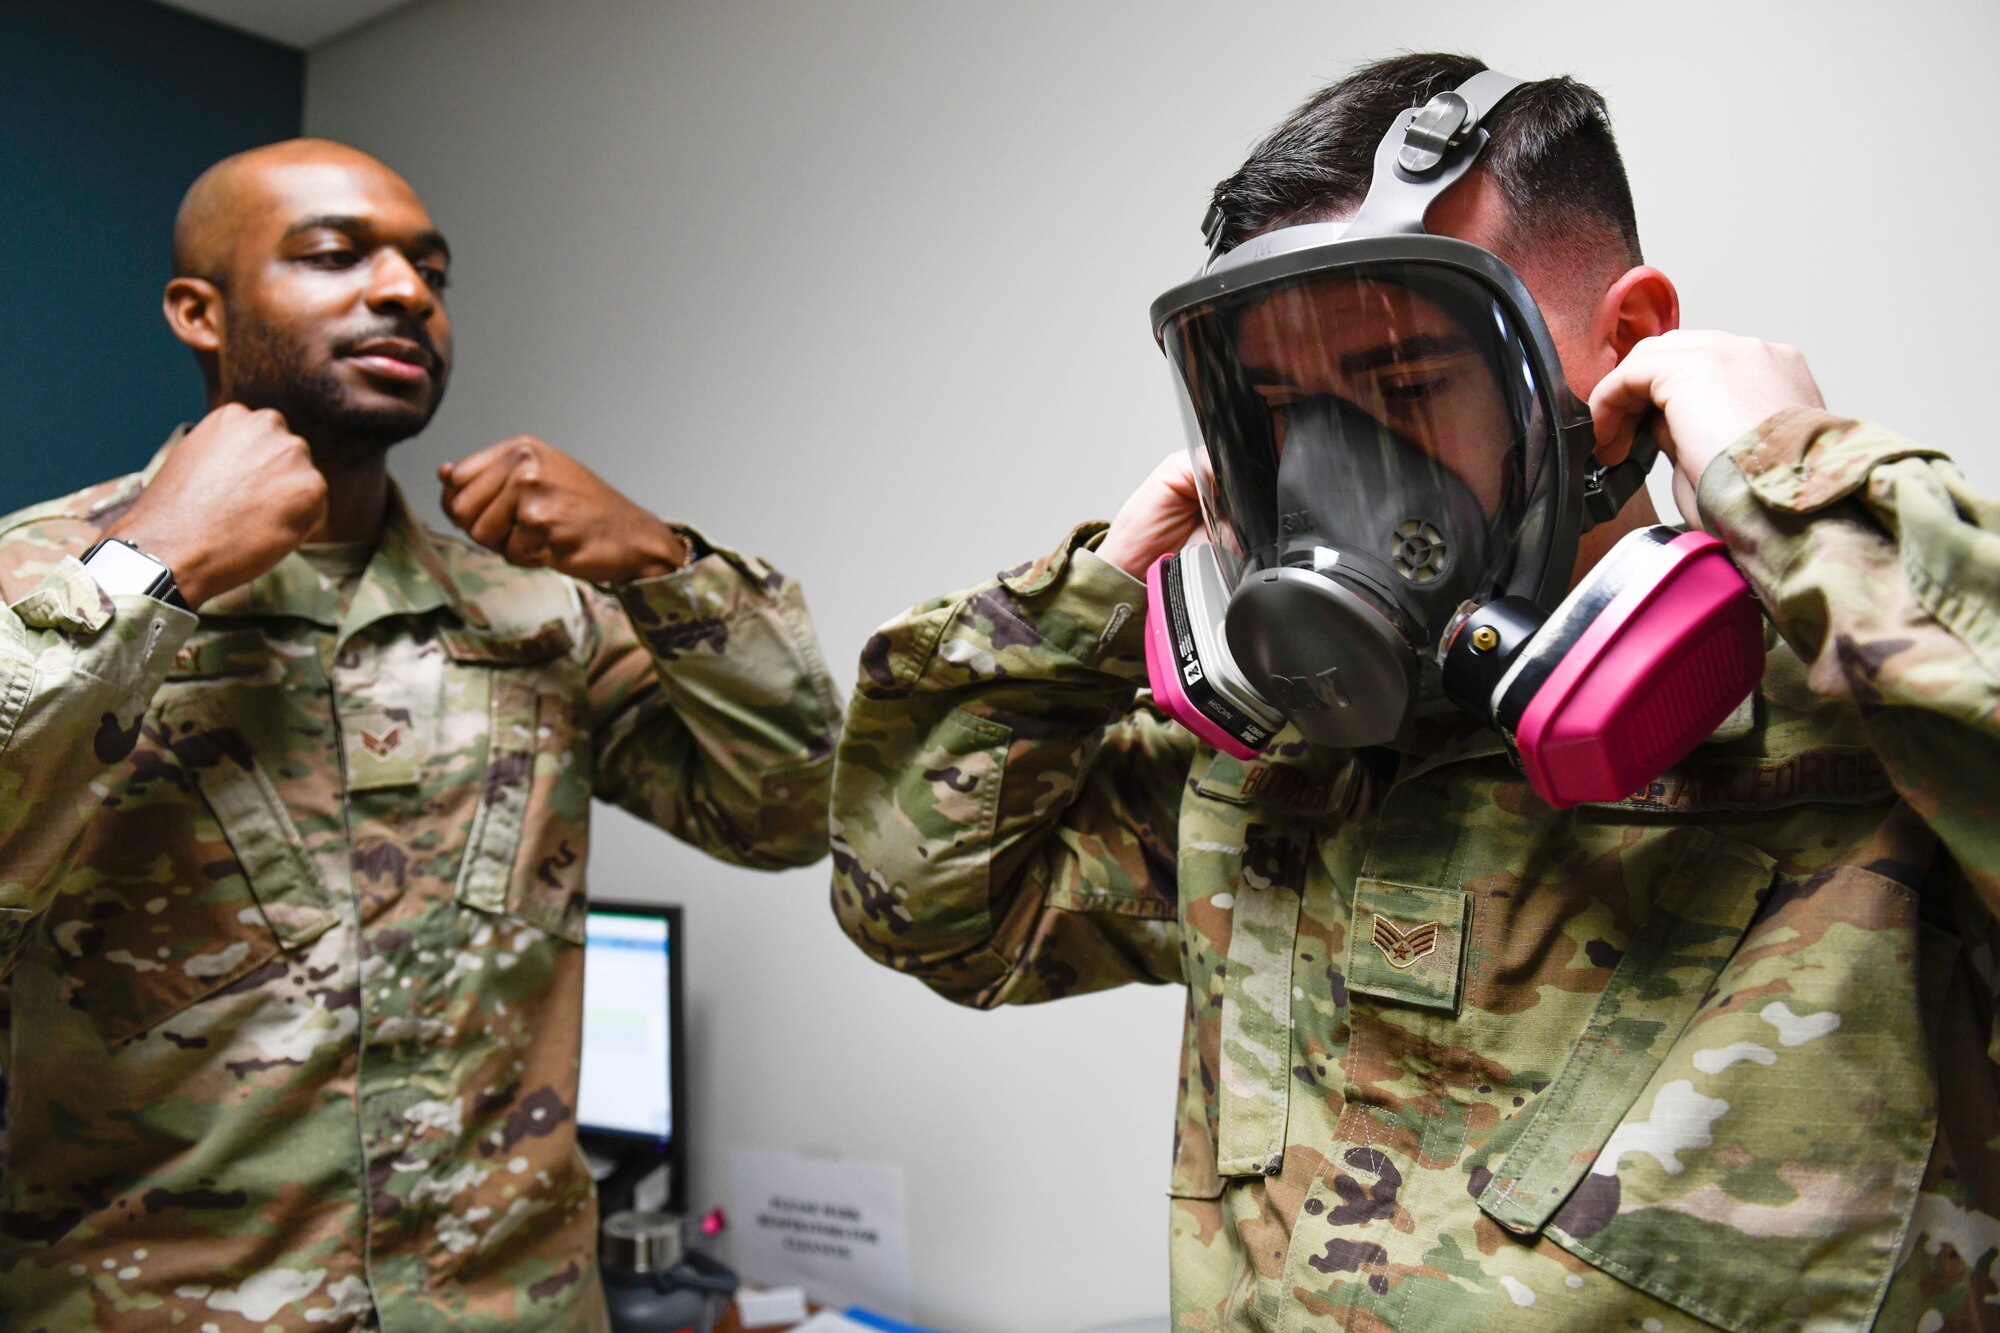 U.S. Air Force Senior Airman Gregory Rackley, 56th Occupational Medicine Readiness Squadron bioenvironmental engineering technician, instructs Senior Airman Joseph Bowden, 62nd Aircraft Maintenance Unit crew chief, on the procedure to tighten a gas mask during a fit test at Luke Air Force Base, Arizona, Jan. 14, 2020. The technicians administer fit tests for individuals who are deploying, and individuals perform various movements while wearing the gas mask to test how well it fits to their face. Bioenvironmental engineering’s mission is to provide reliable health risk expertise to optimize human performance and prevent adverse health effects of Airmen. (U.S. Air Force photo by Airman 1st Class Brooke Moeder)